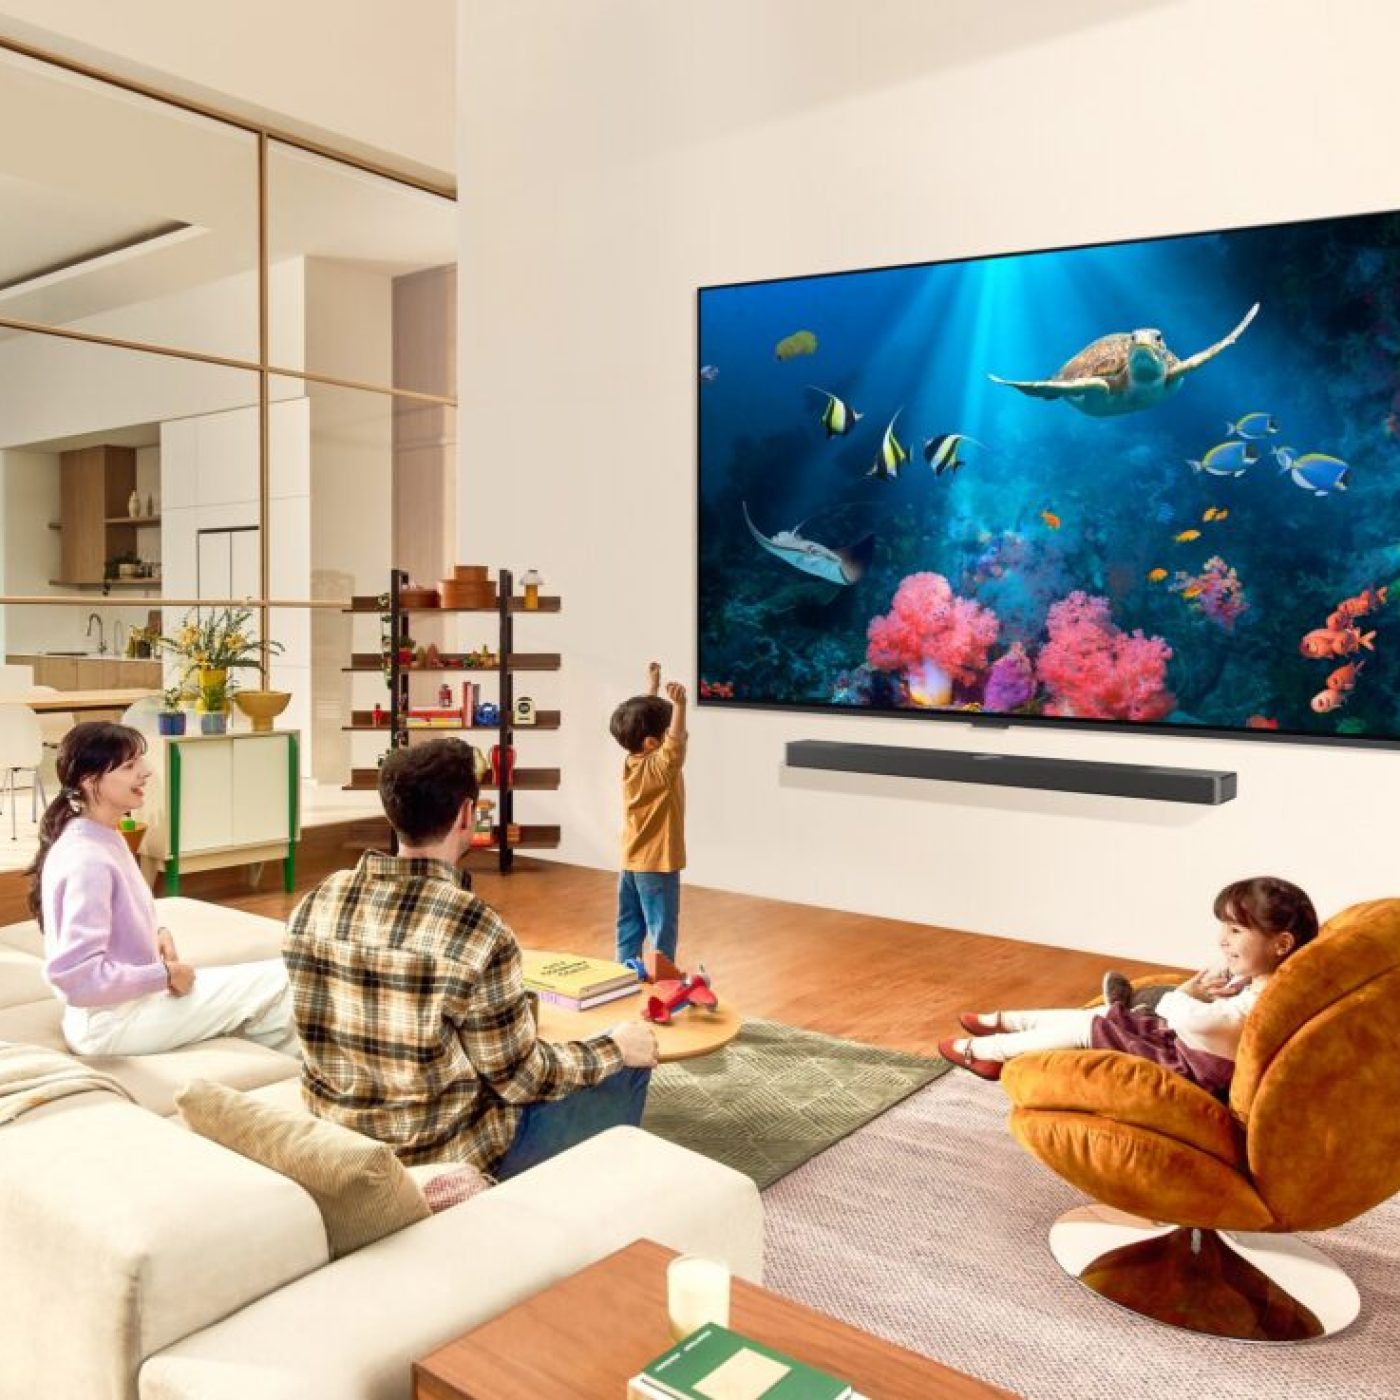 LG unveils a 98-inch Mini LED television that it will show off at CES